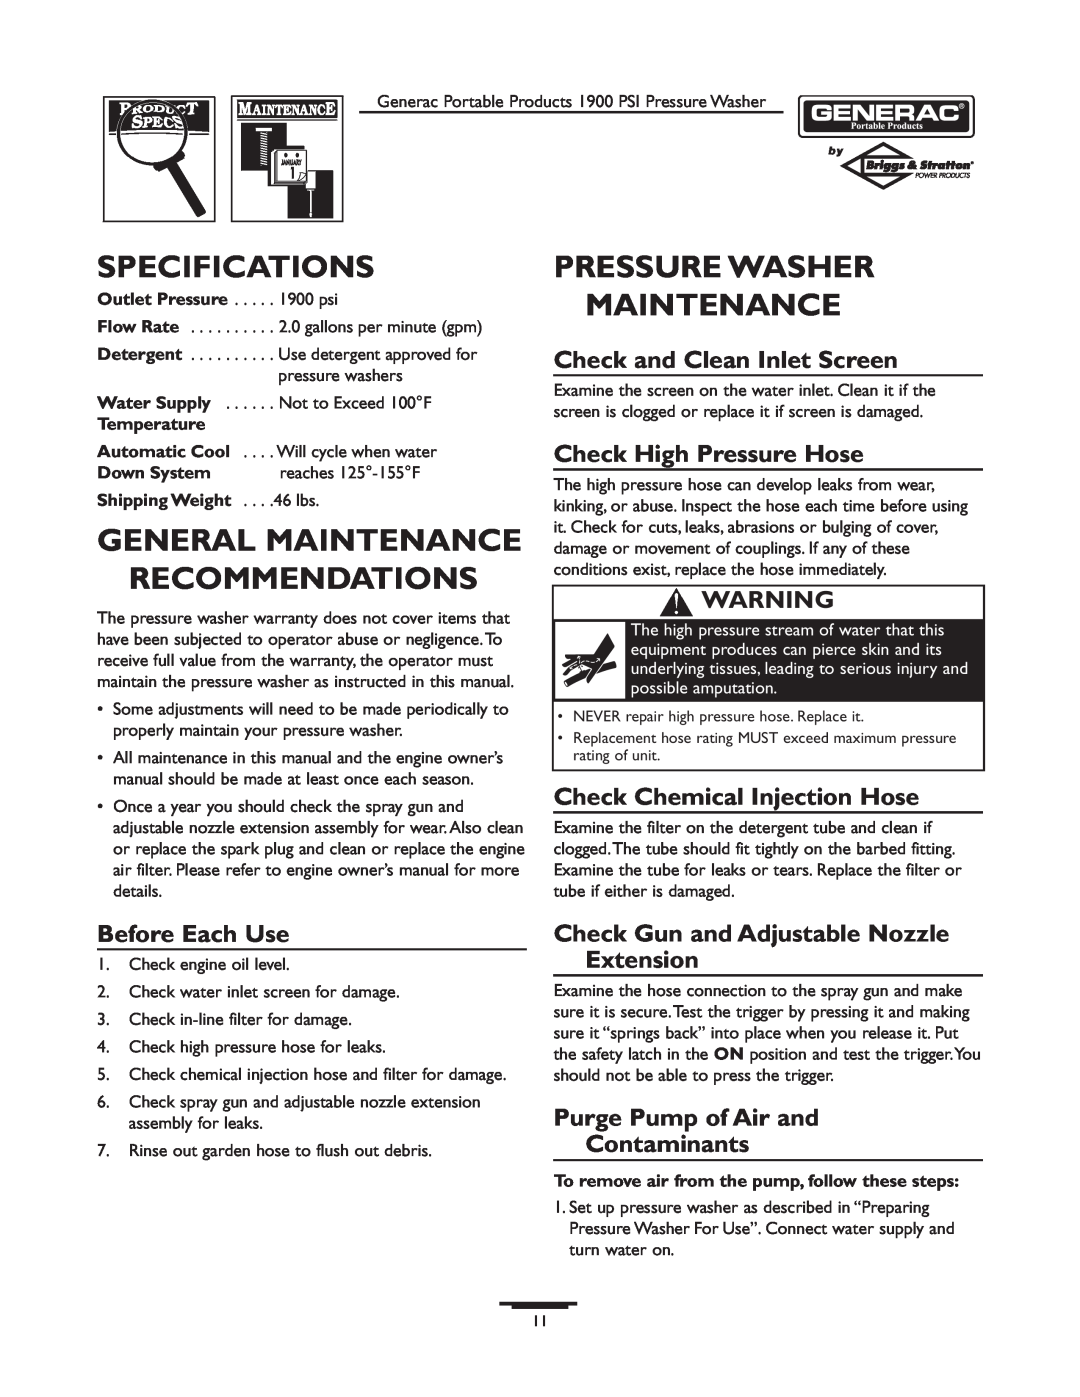 Briggs & Stratton 1900PSI owner manual Specifications, General Maintenance Recommendations, Pressure Washer Maintenance 